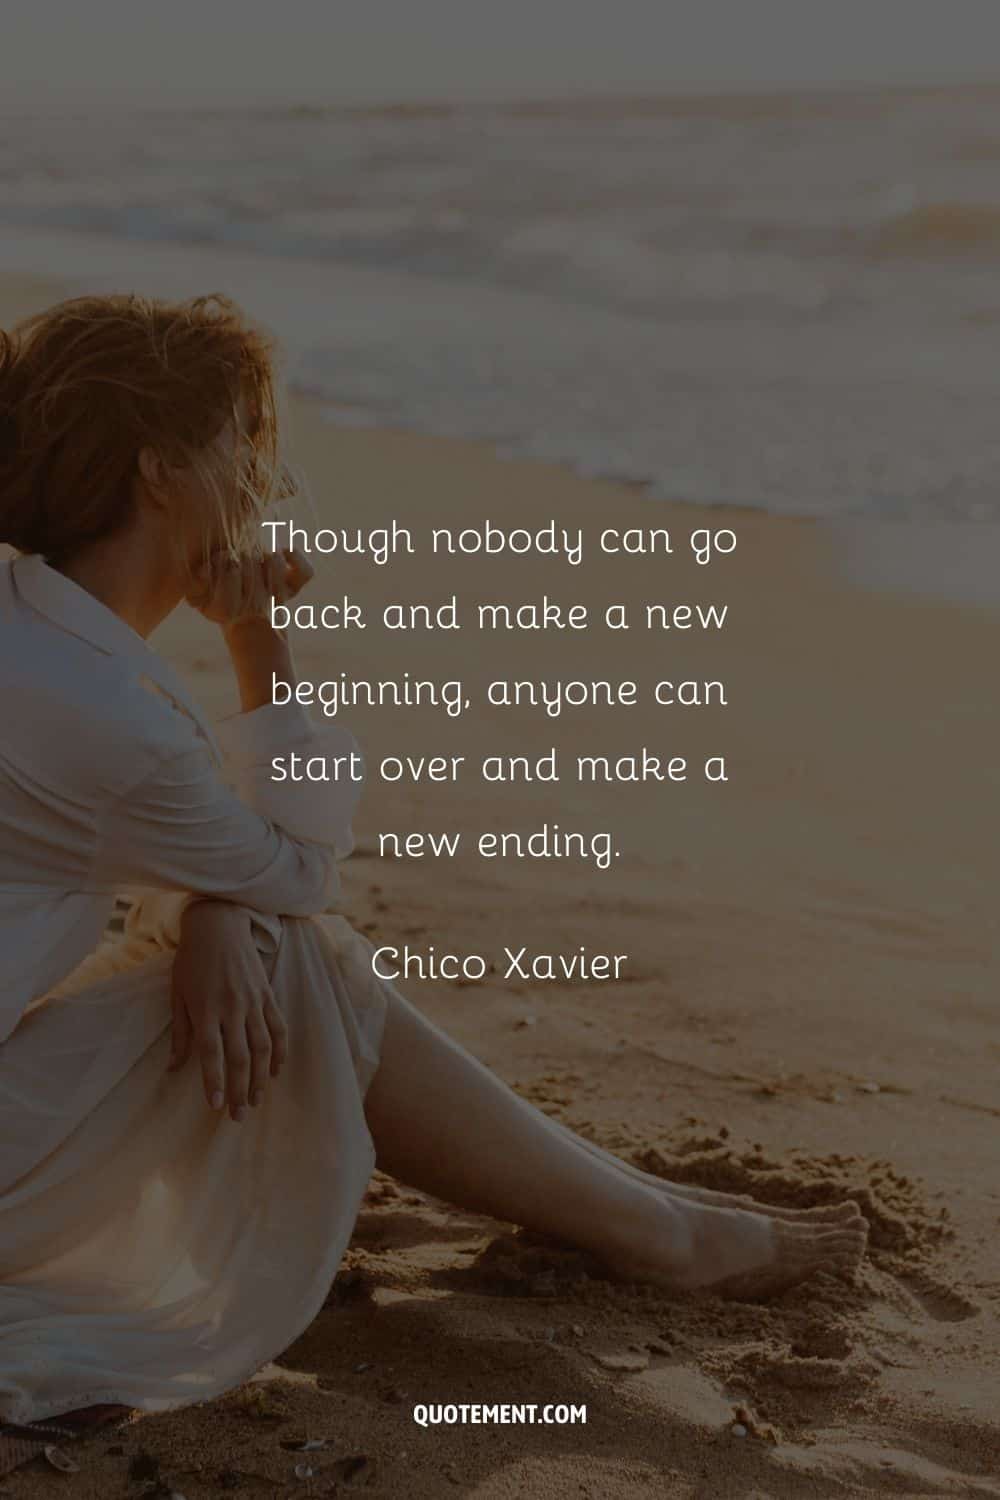 “Though nobody can go back and make a new beginning, anyone can start over and make a new ending.” — Chico Xavier